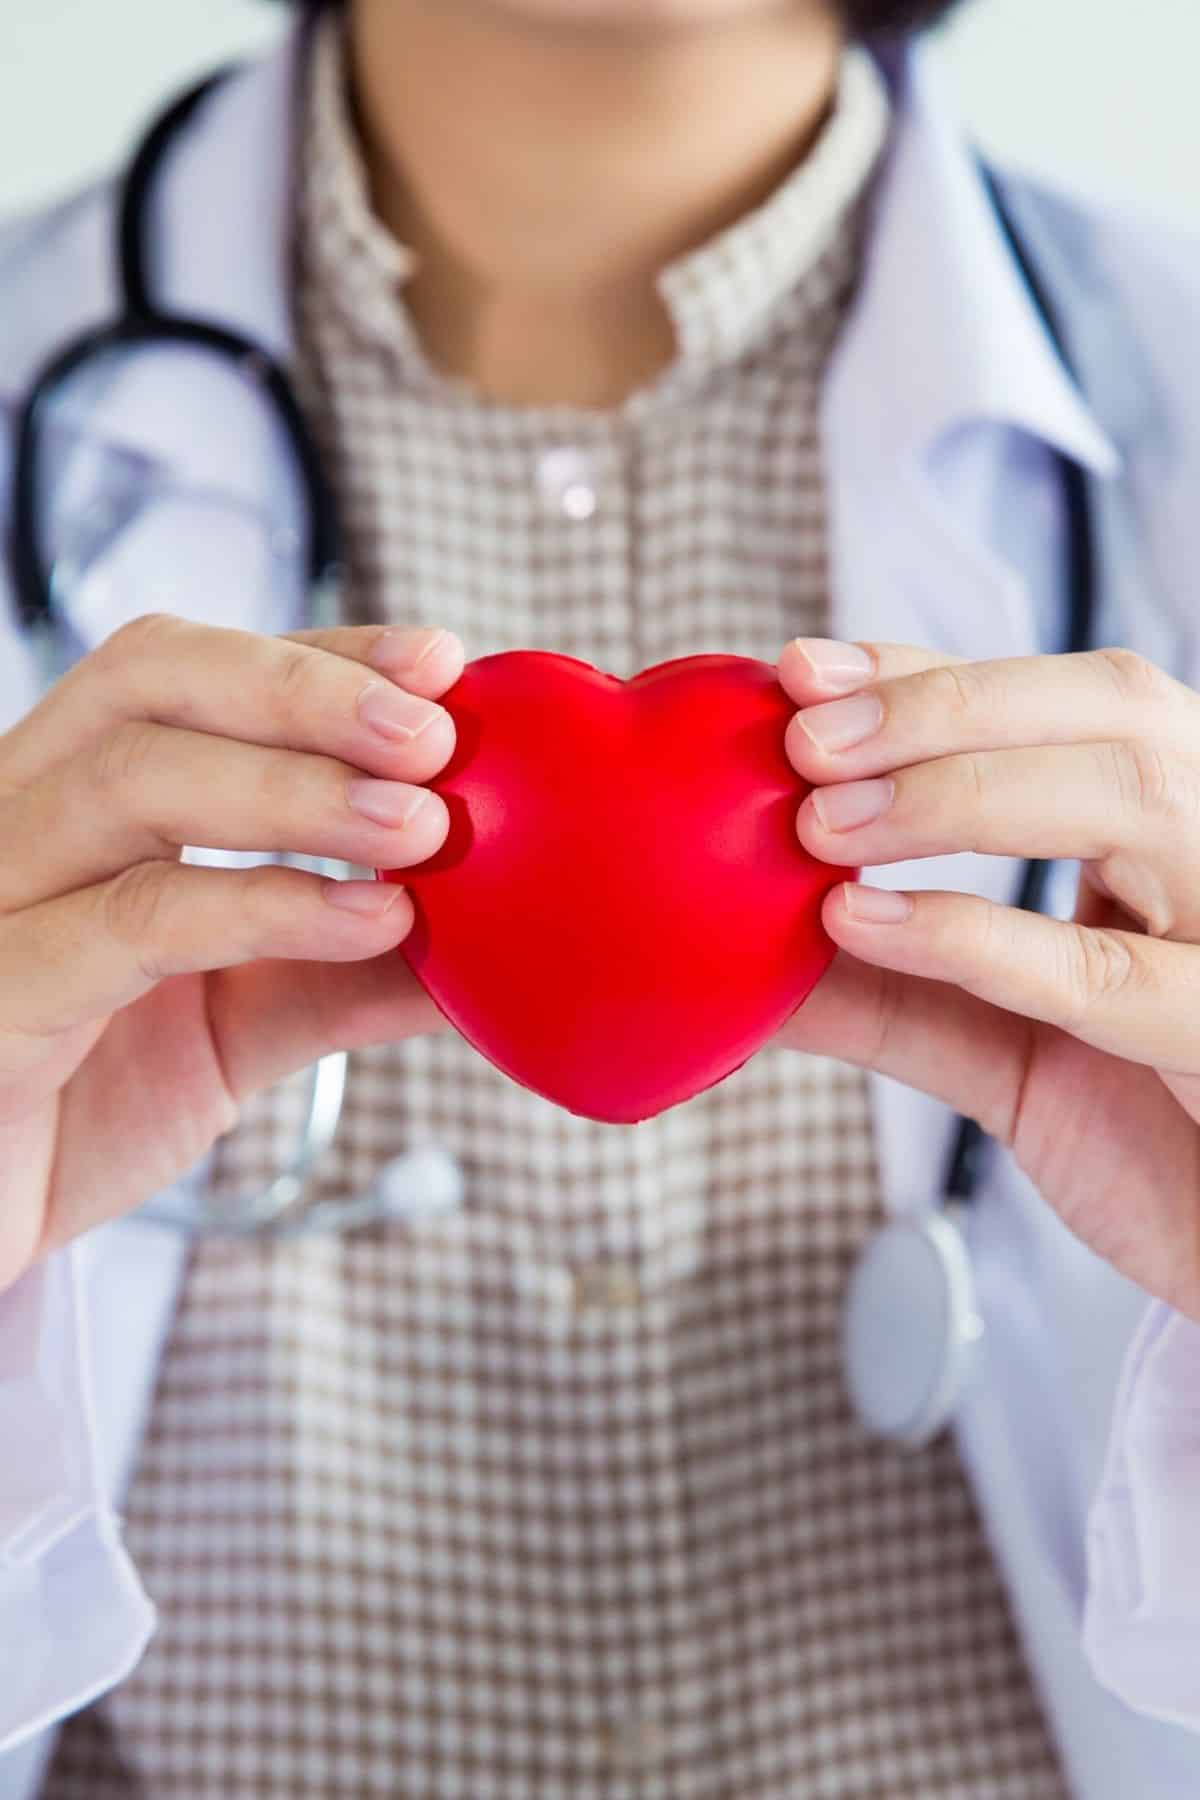 doctor holding a heart shaped item